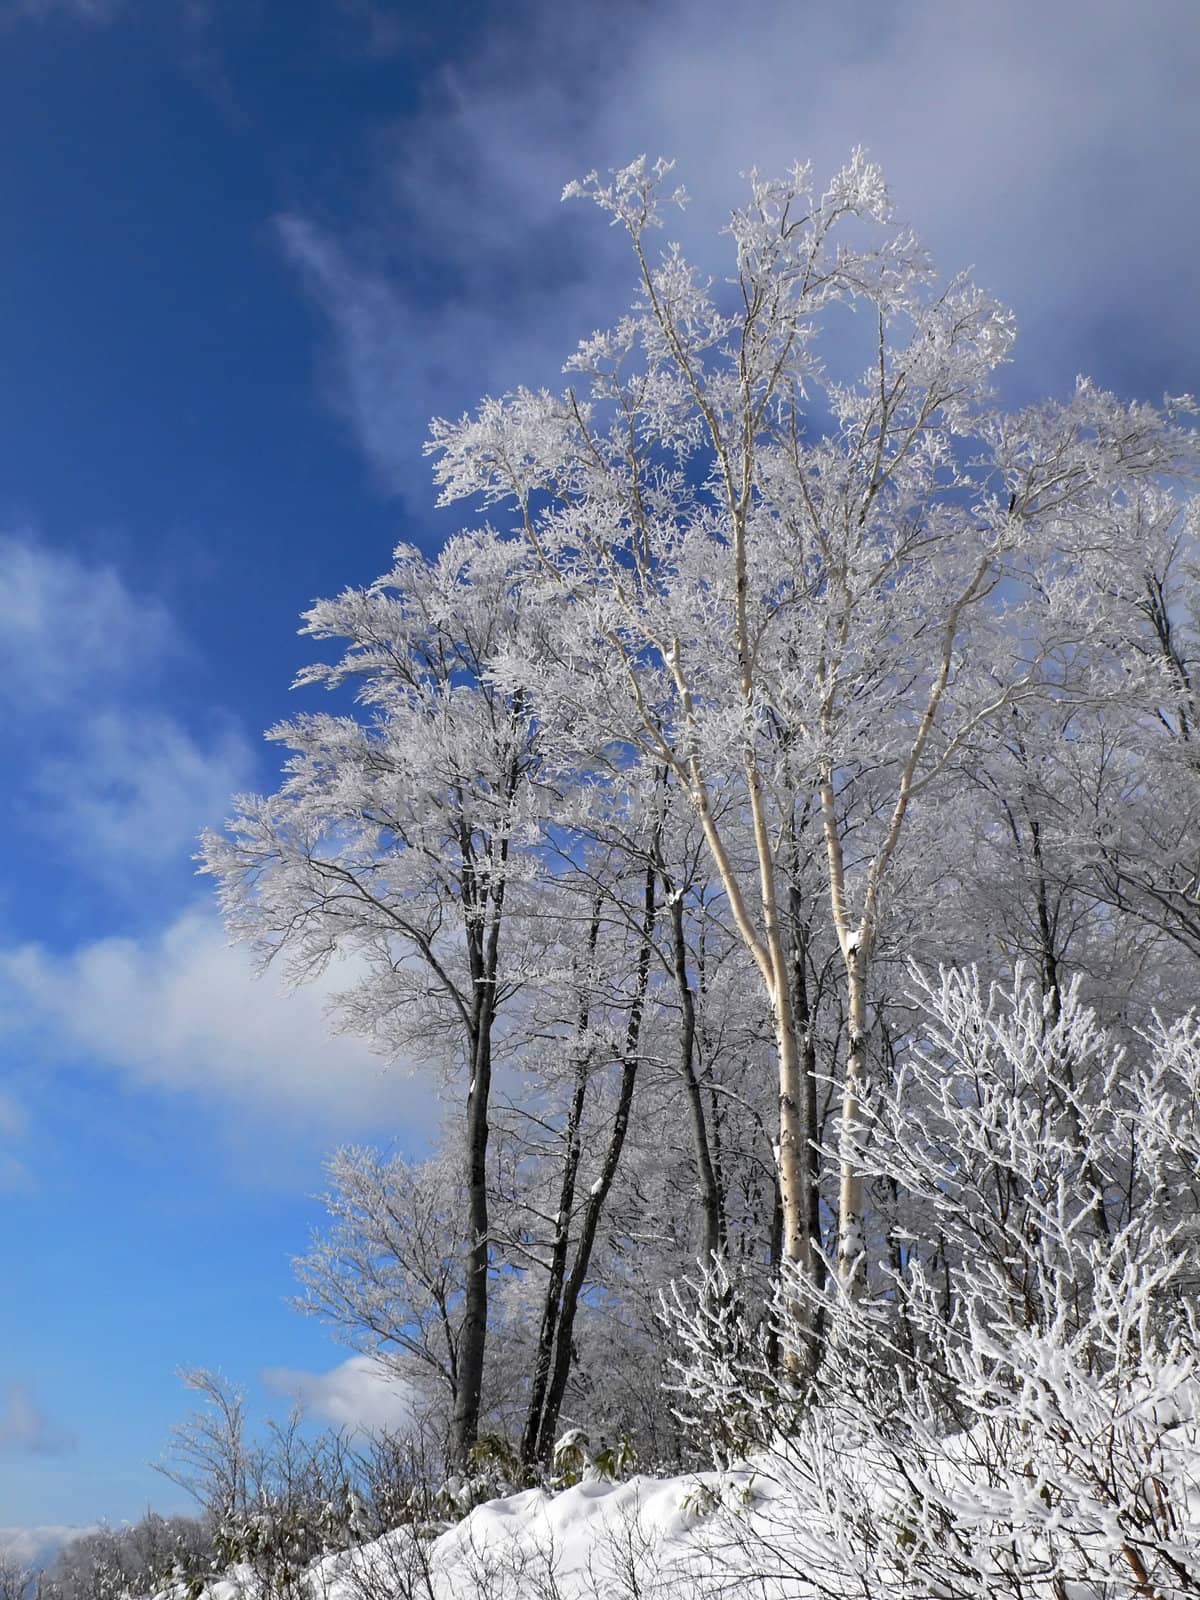  winter forest with frosted tree branches over blue sky